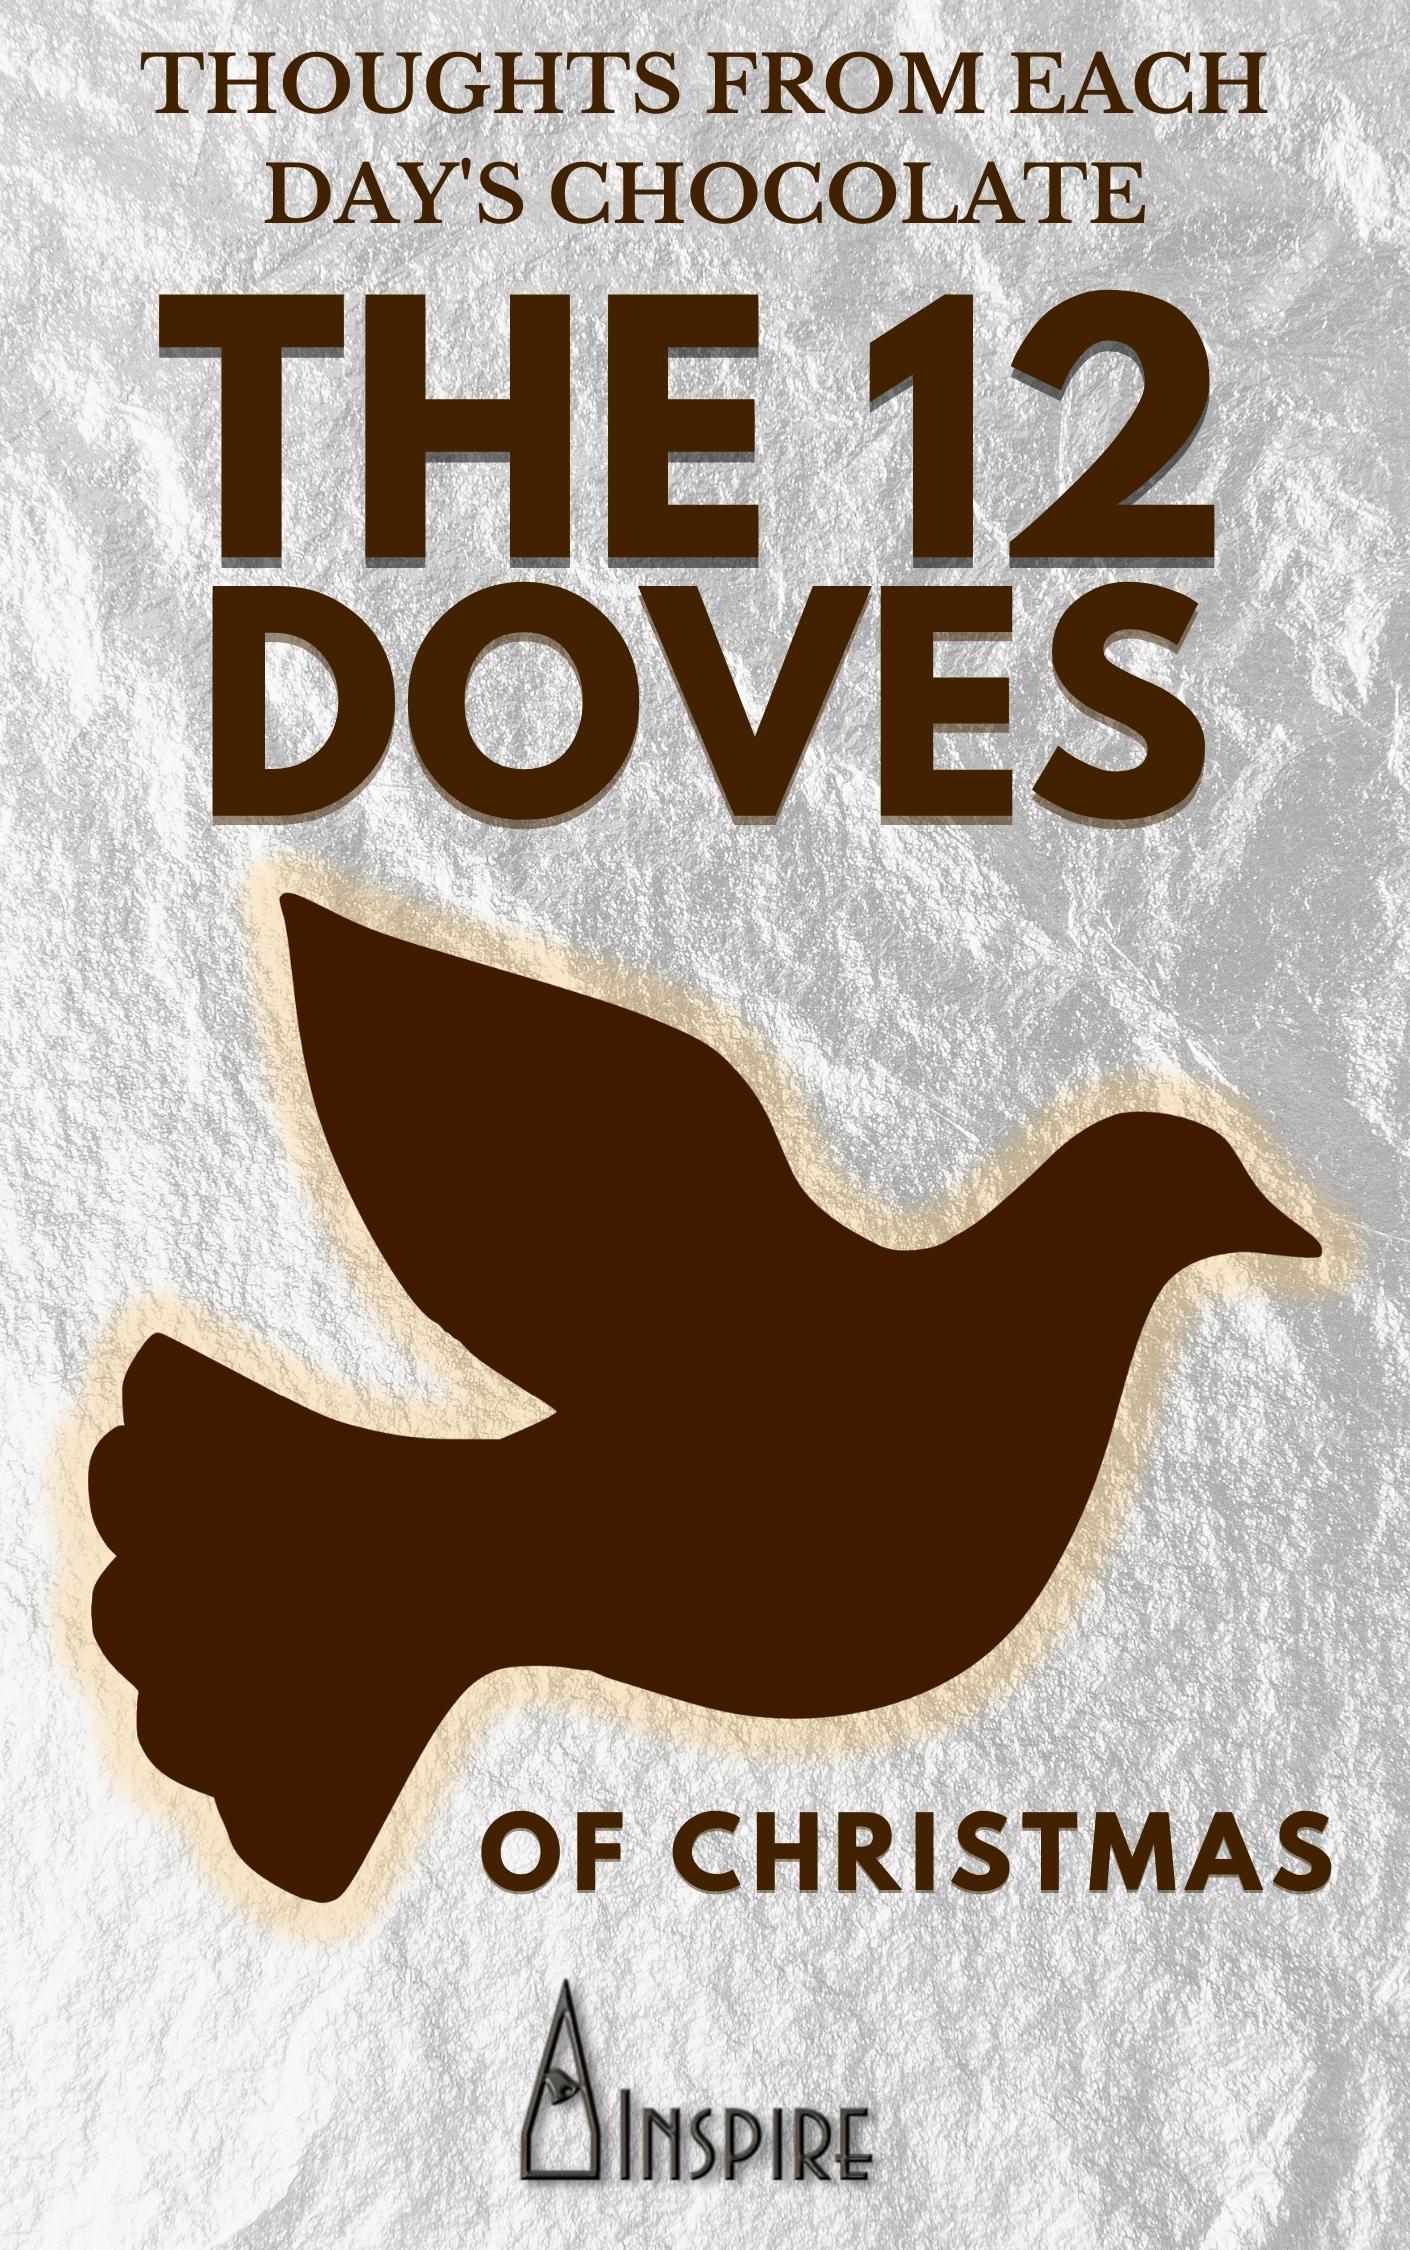 THE 12 DOVES